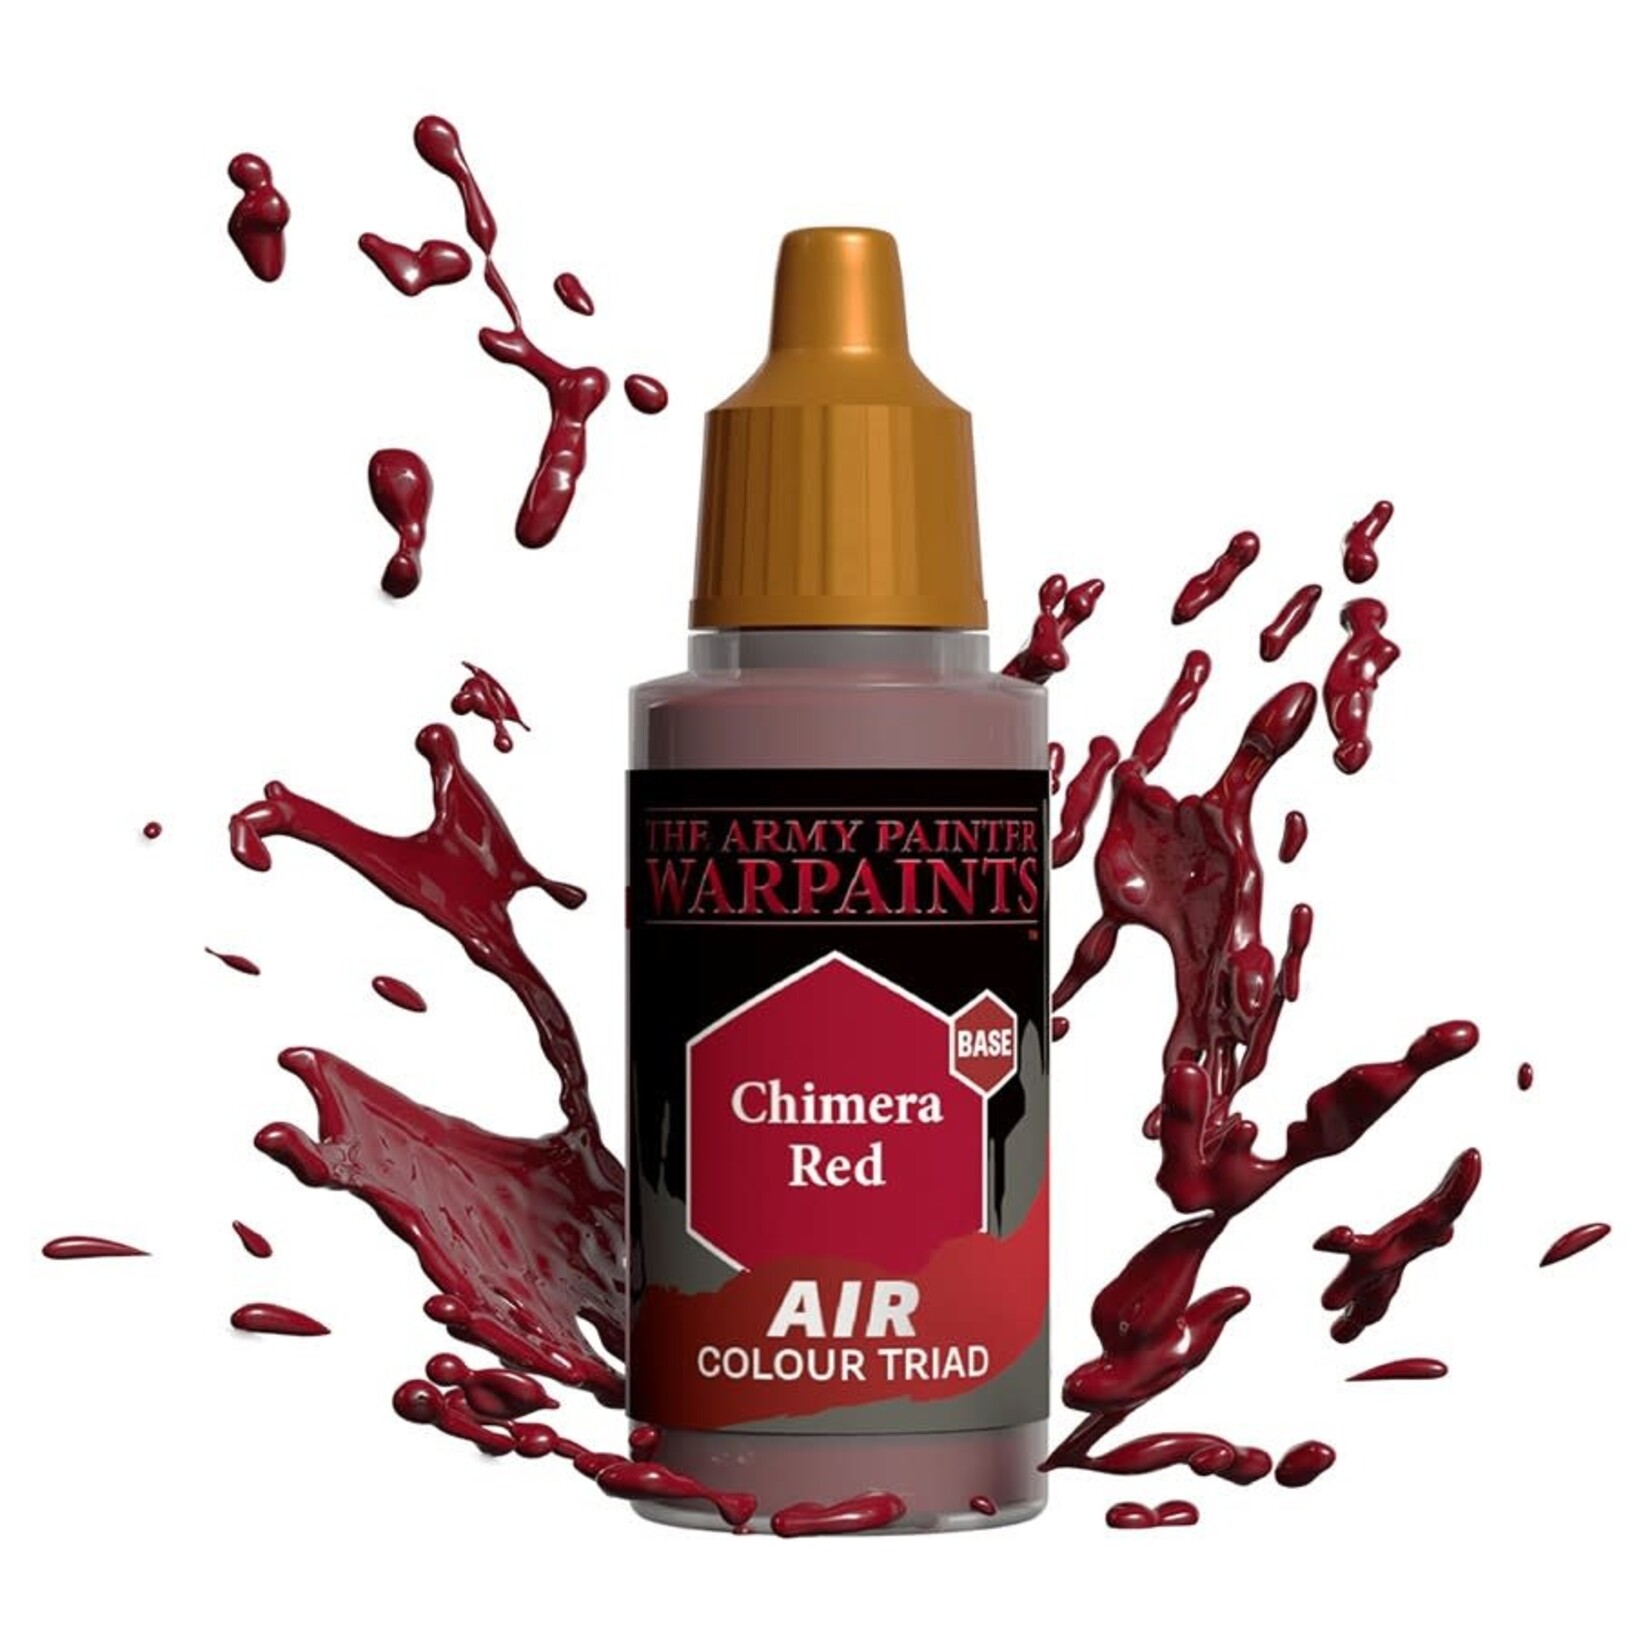 The Army Painter Air: Chimera Red 18ml